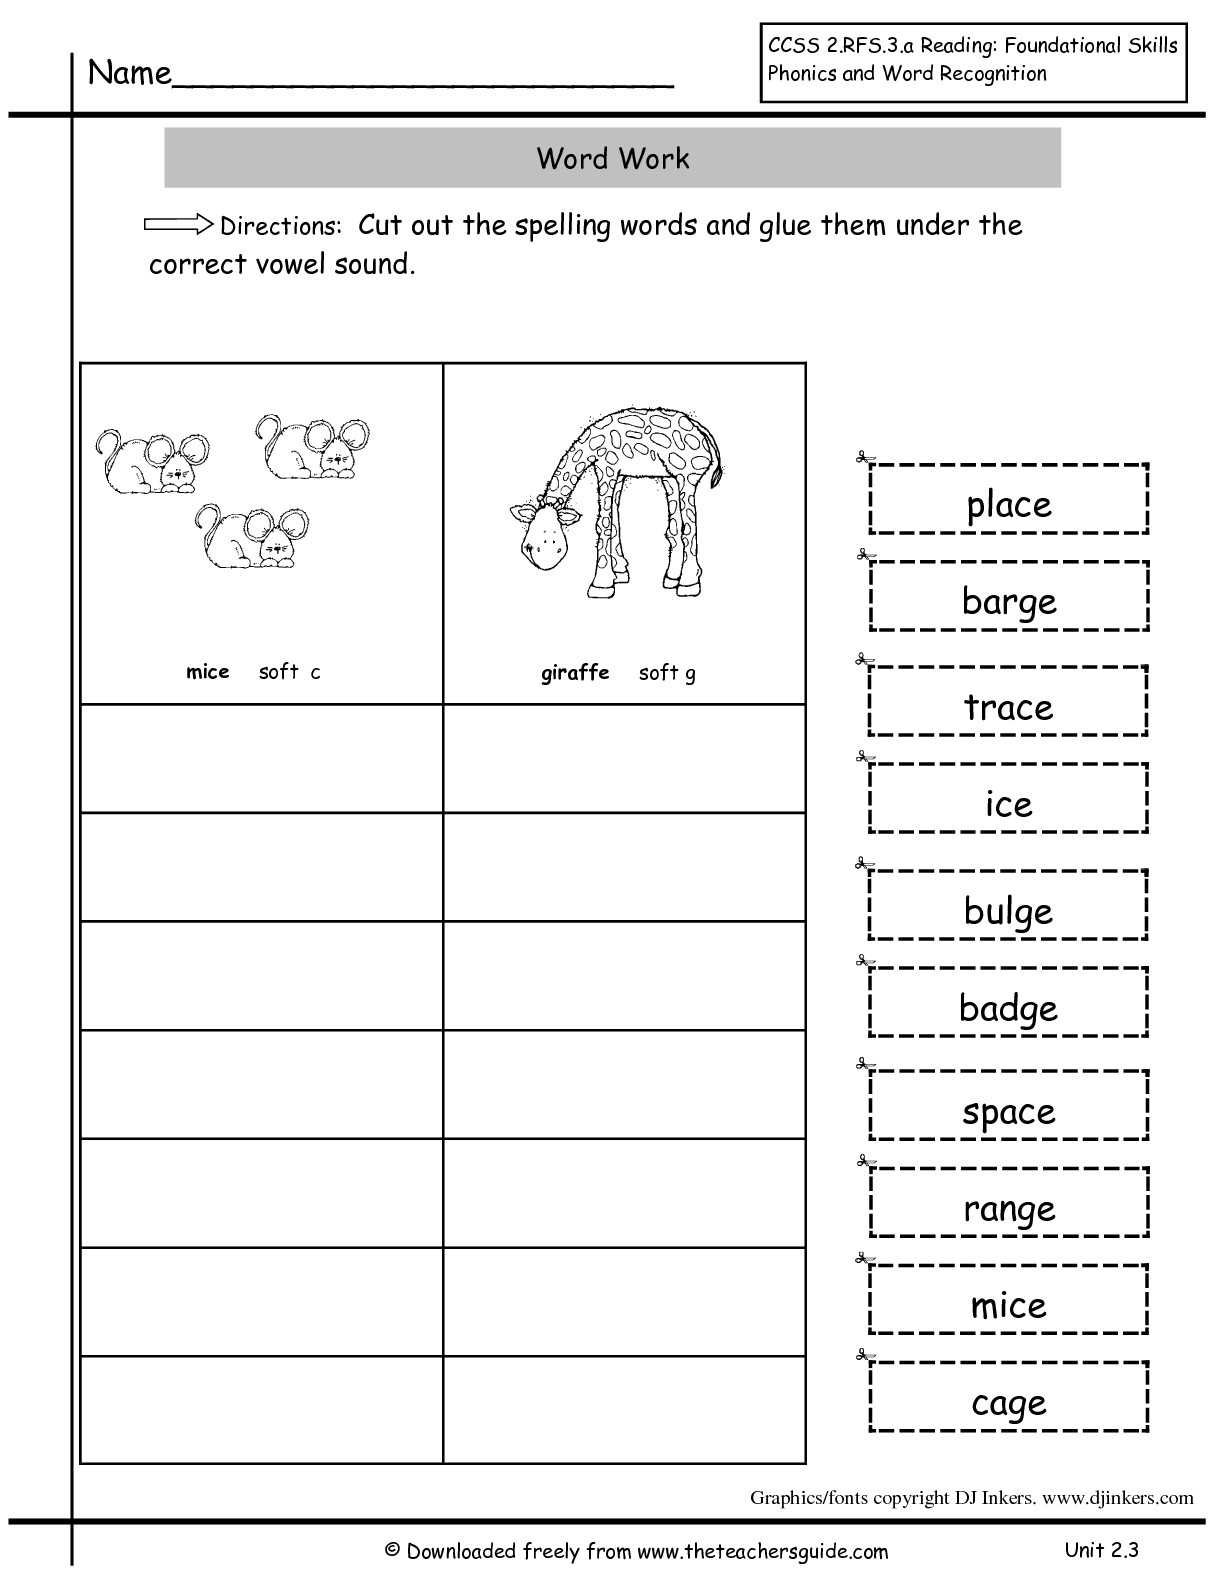 Prefix and Suffix Worksheets Pdf as Well as 2nd Grade Activity Sheets Awesome Coloring Math Worksheets for 5th